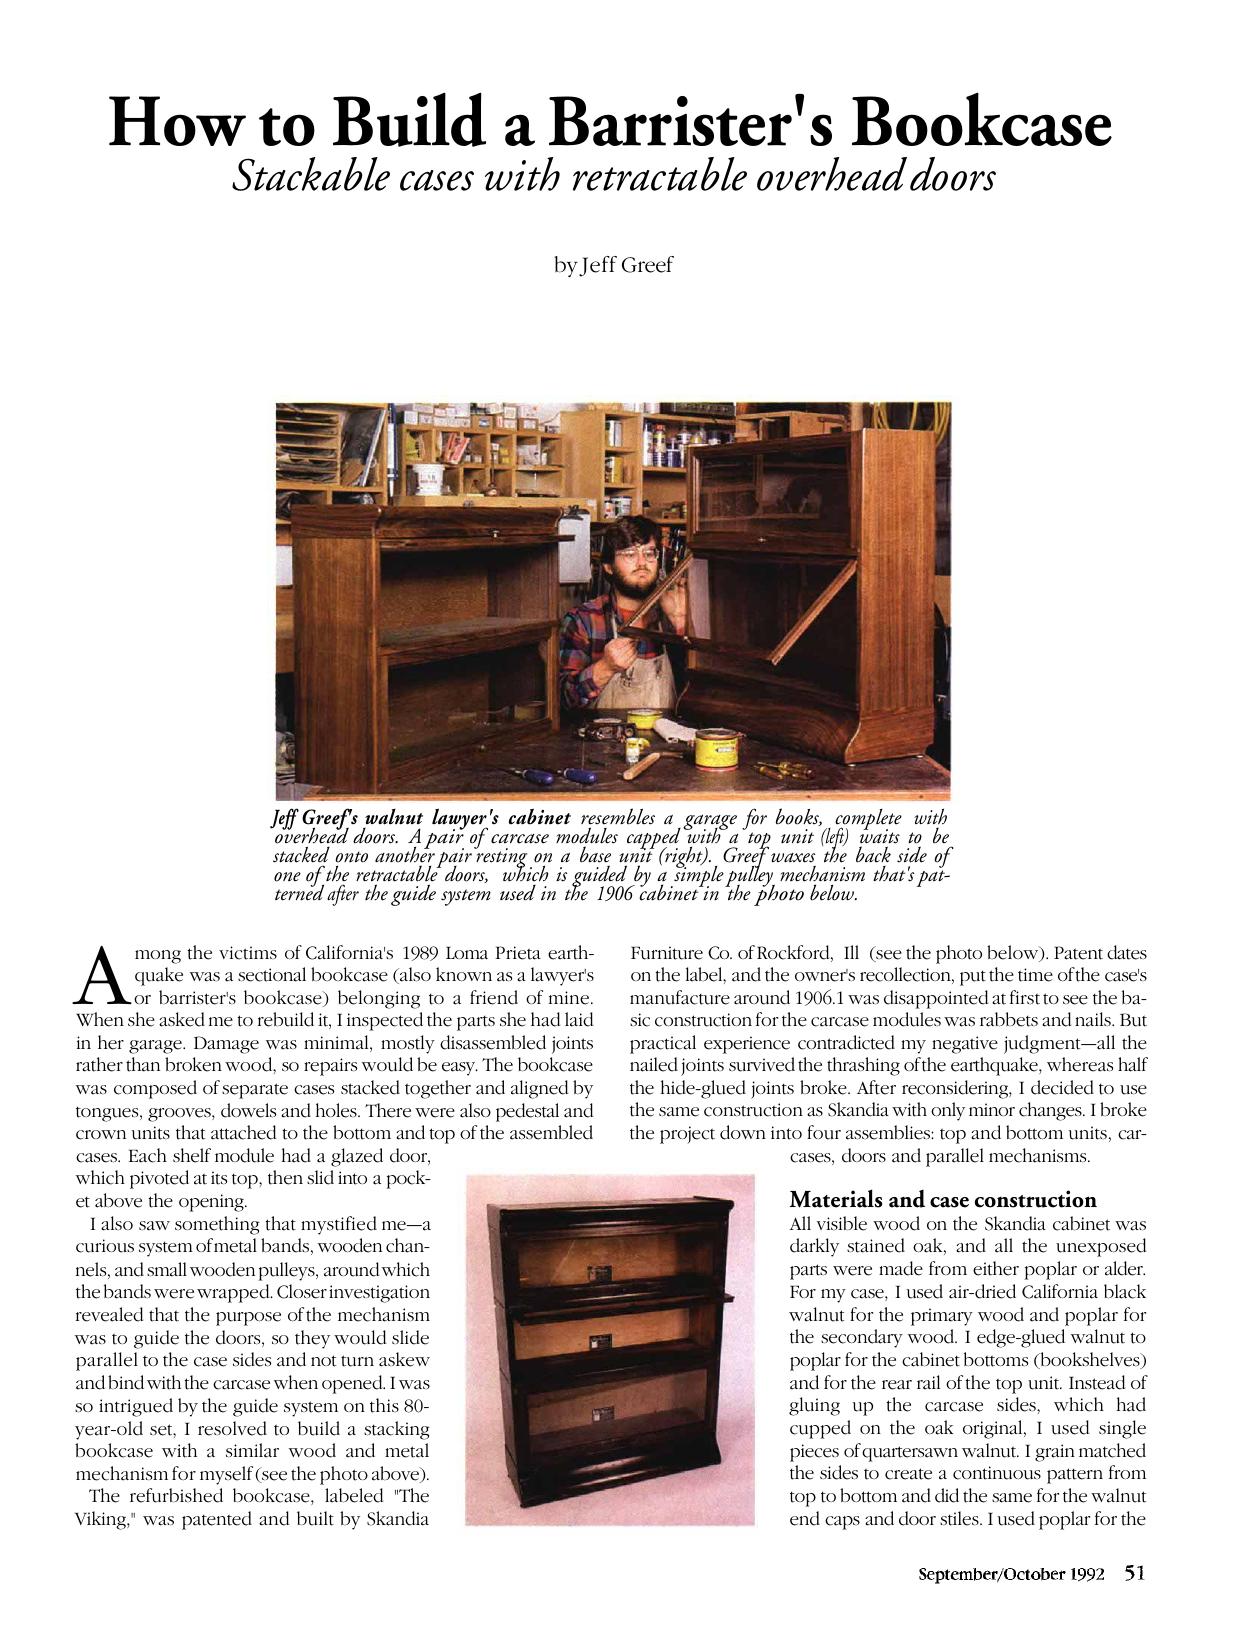 How to Build a Barrister's Bookcase by Jeff Greef